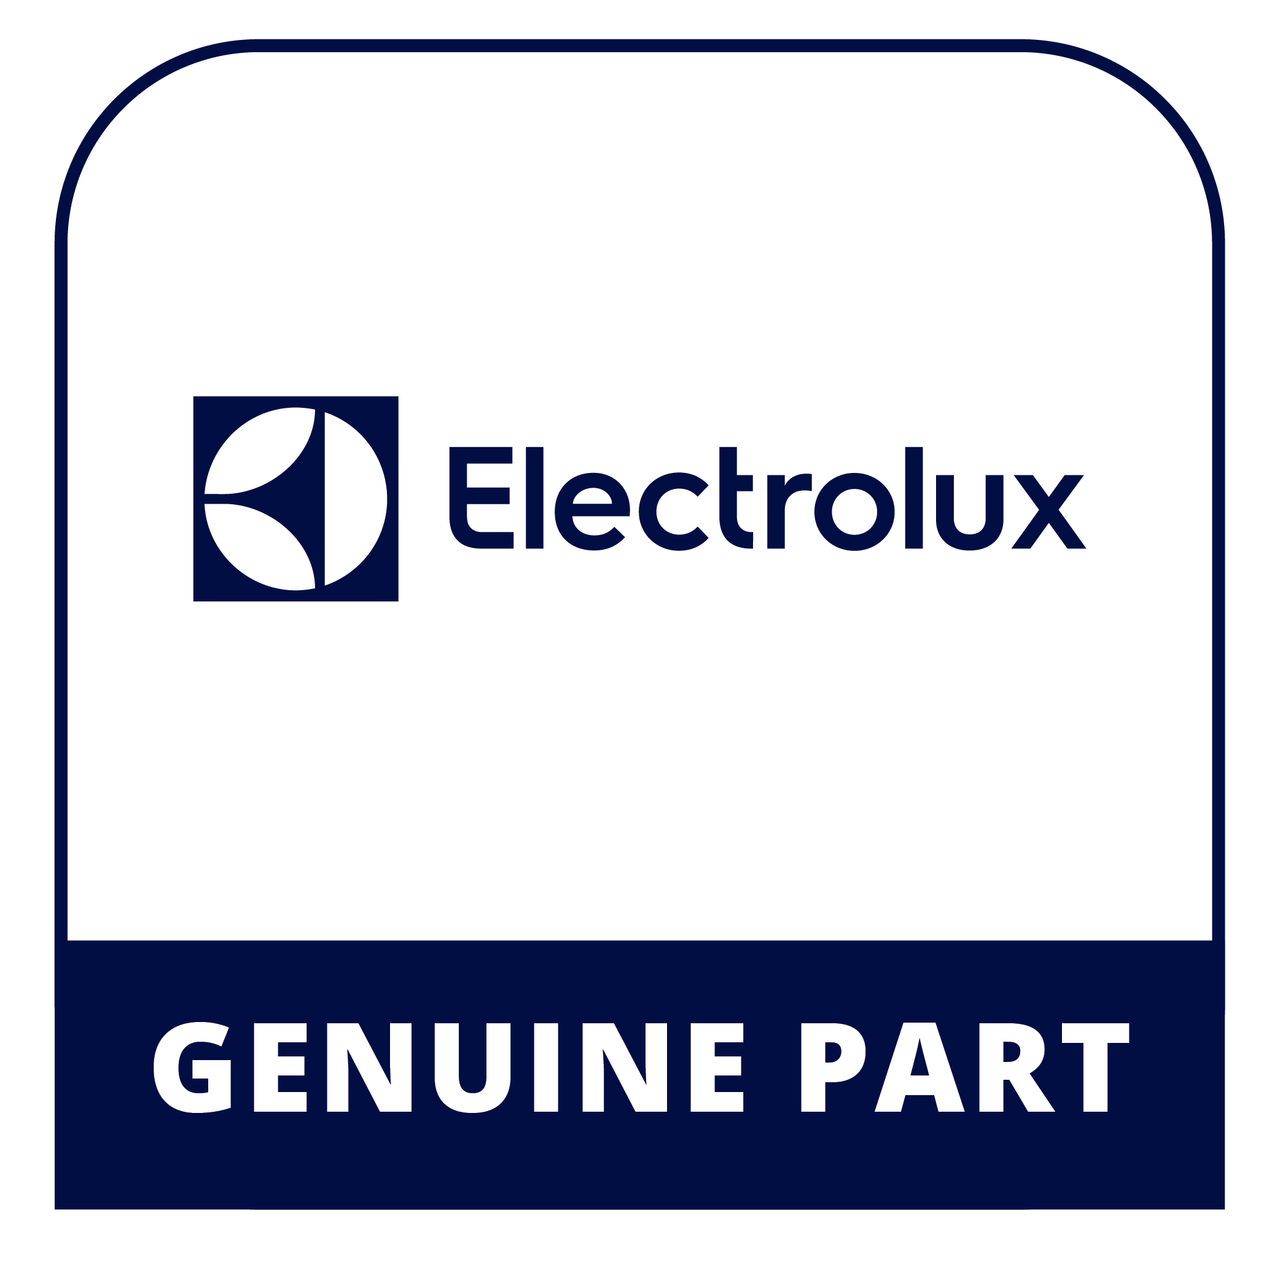 Frigidaire - Electrolux 318205129 Owners Manual - Genuine Electrolux Part